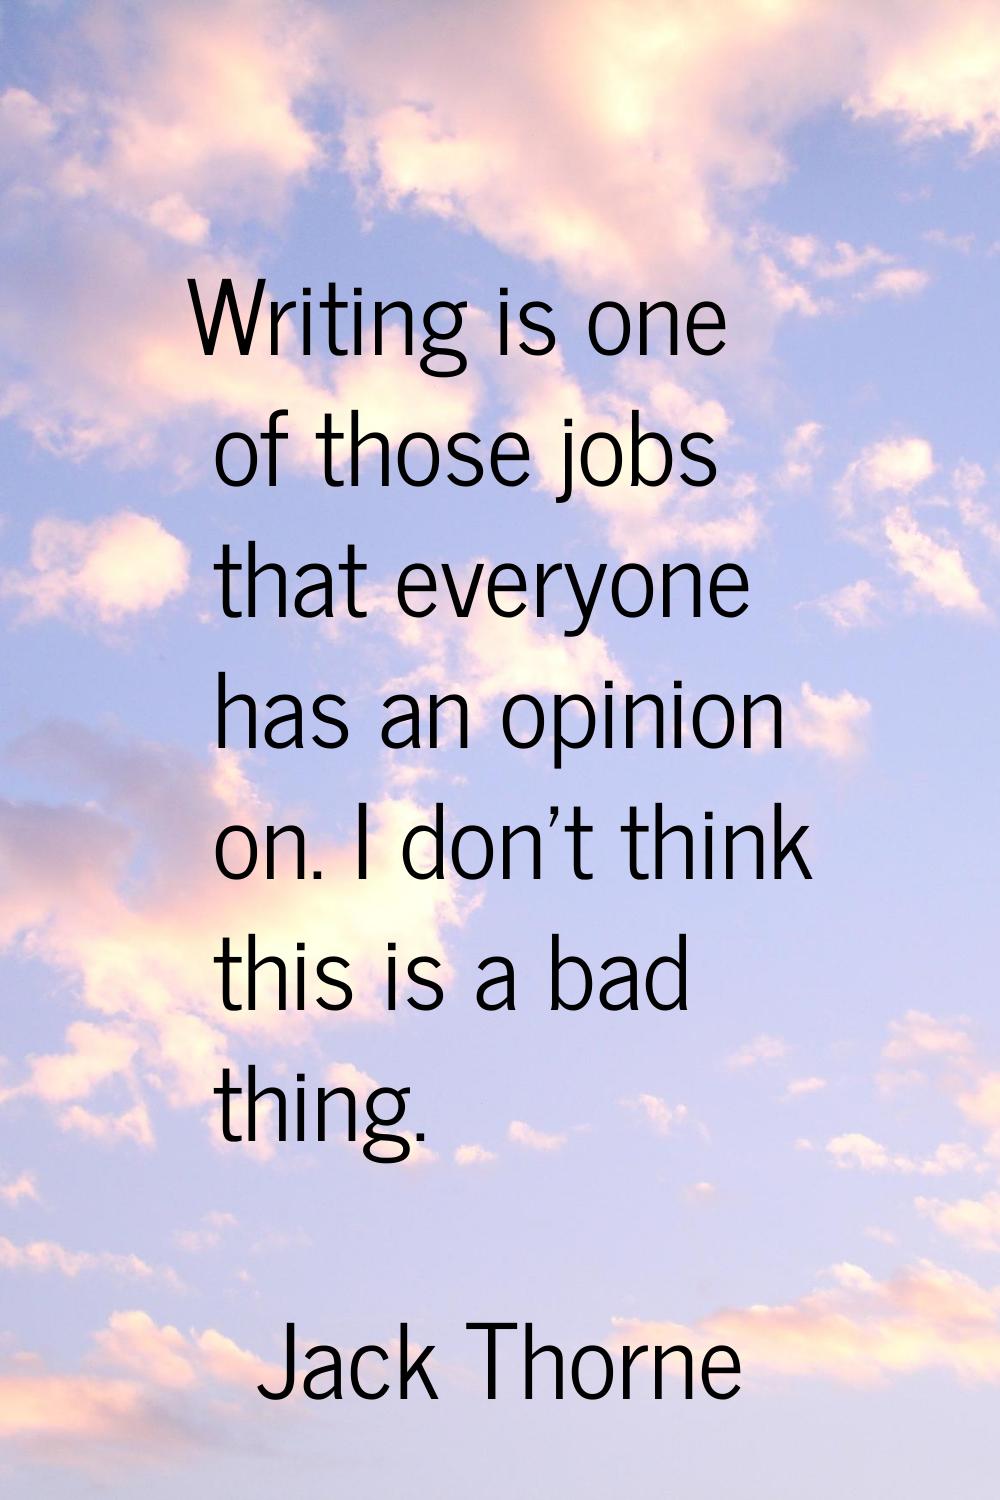 Writing is one of those jobs that everyone has an opinion on. I don't think this is a bad thing.